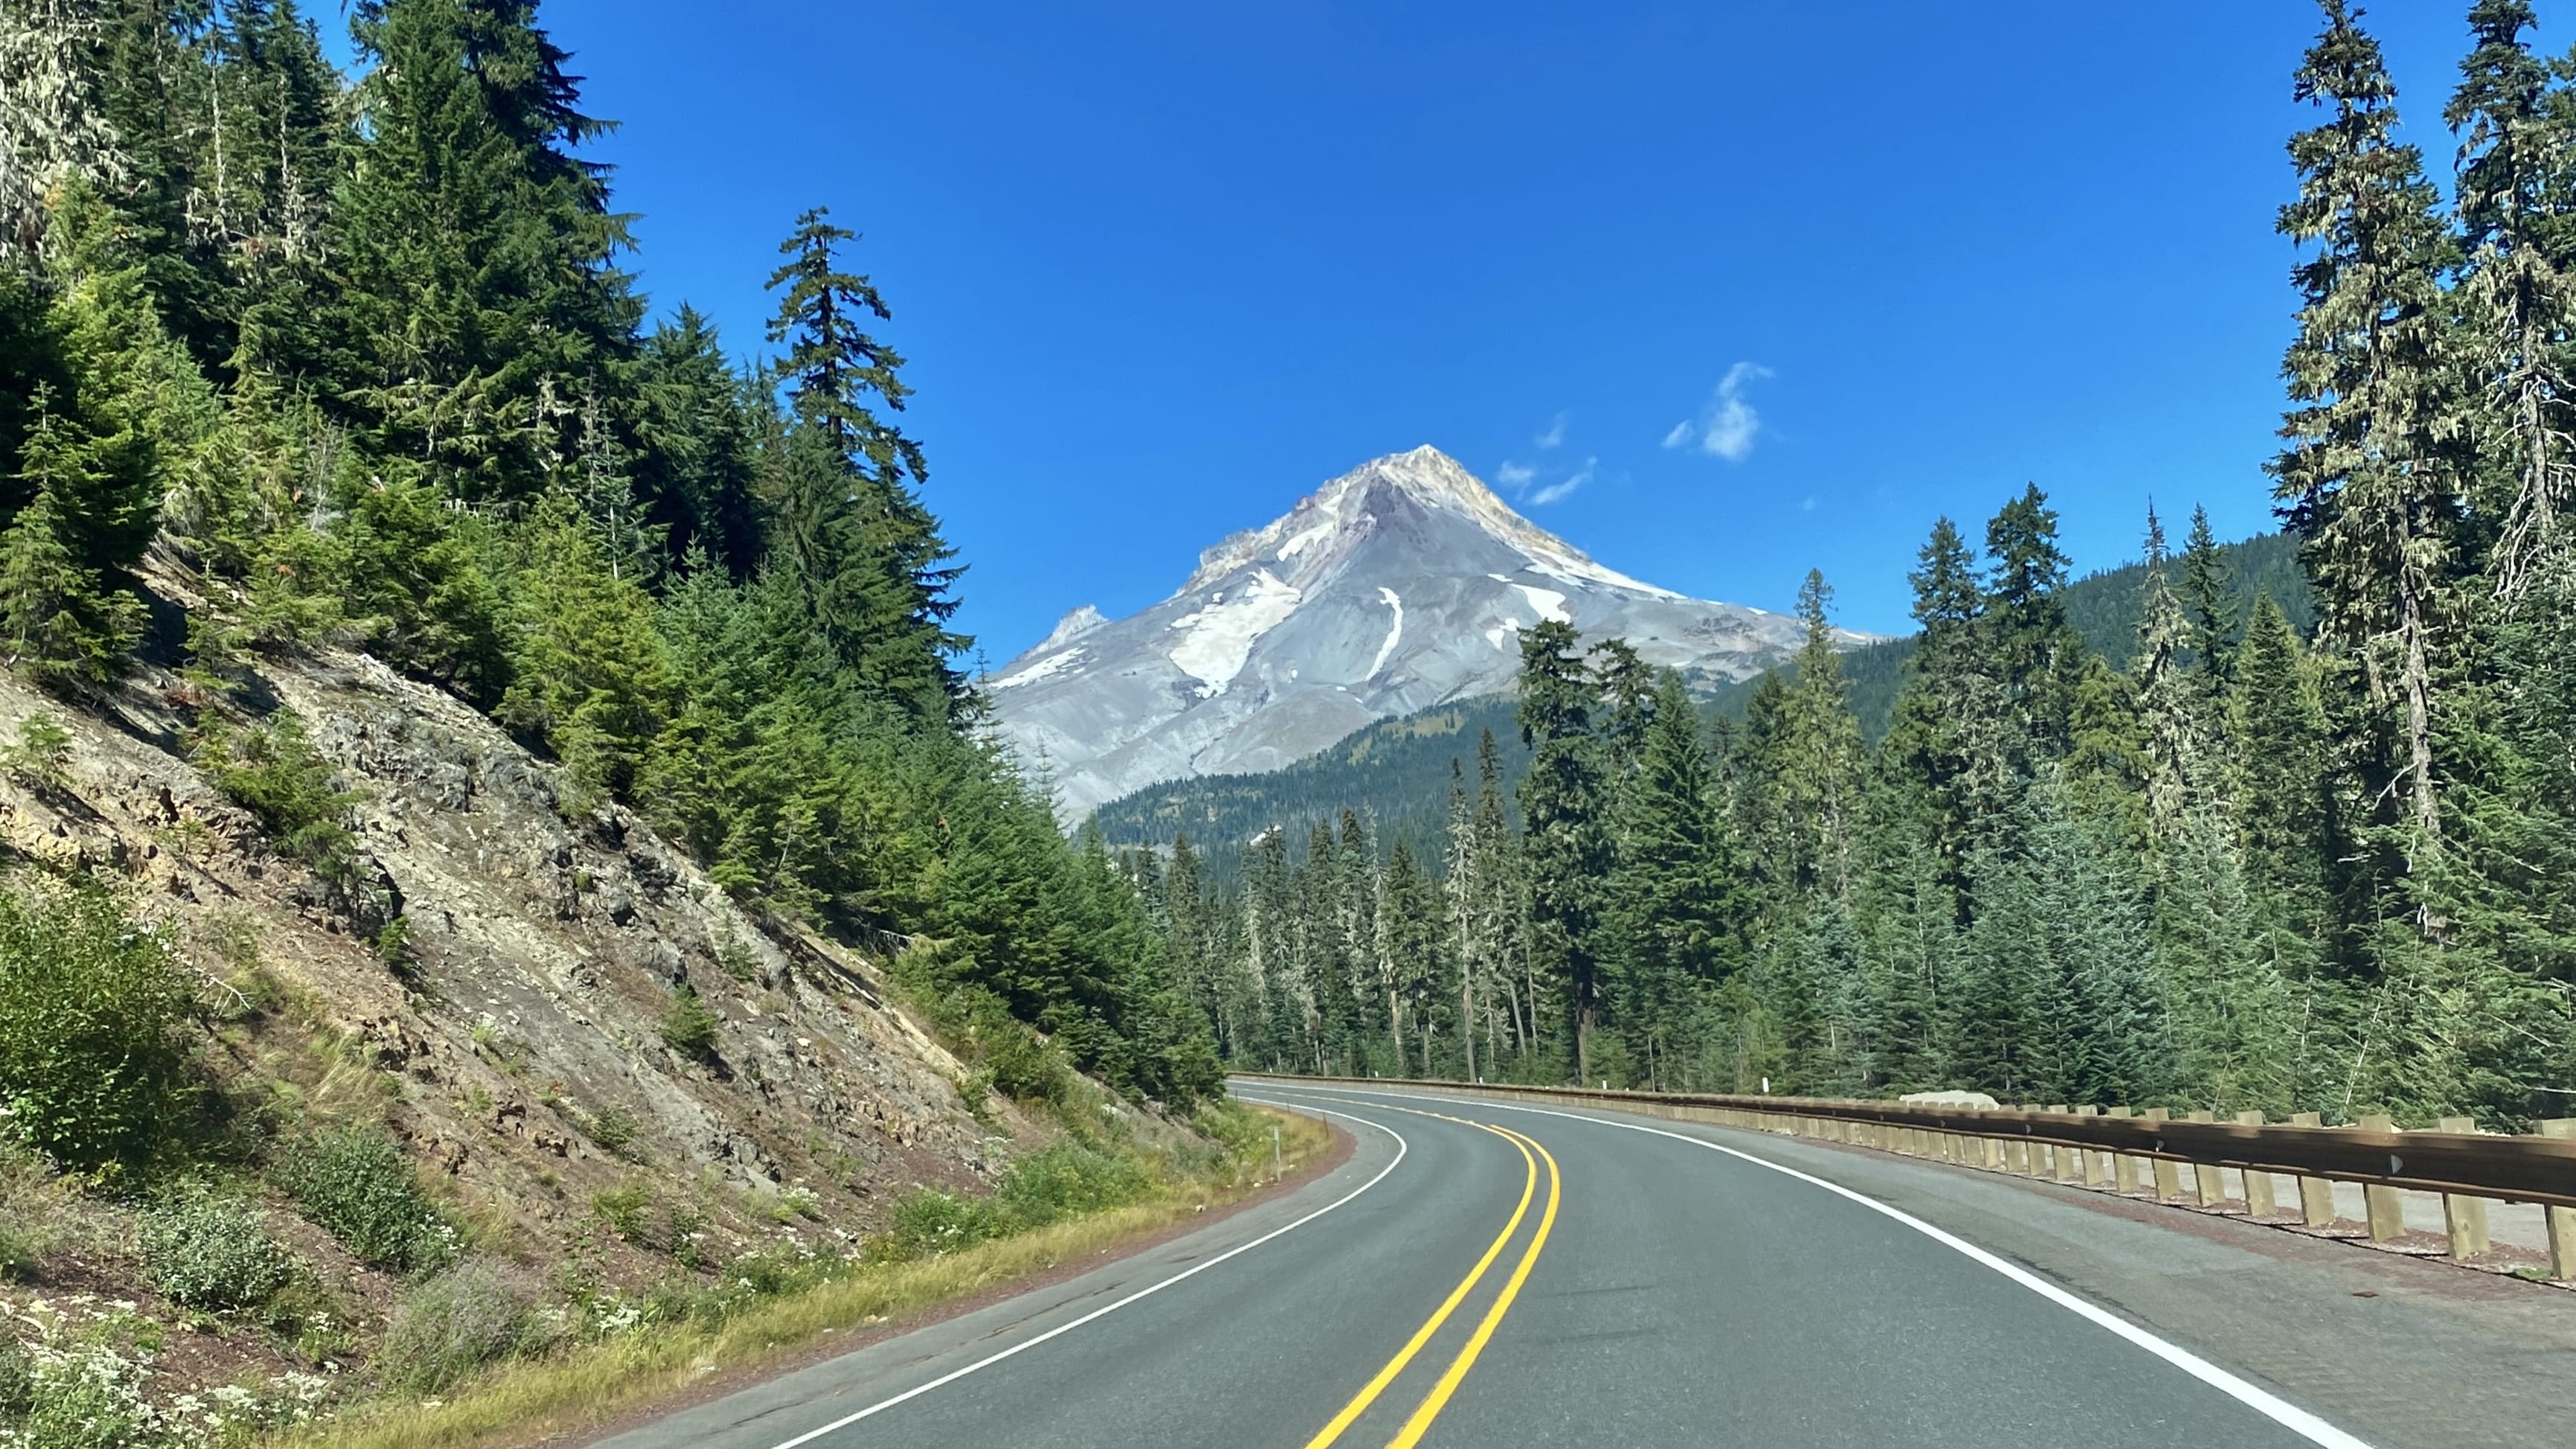 Roadtrip the Oregon Trail: Discover Portland, the Columbia River Gorge, and Mt. Hood on this 4-Day Adventure